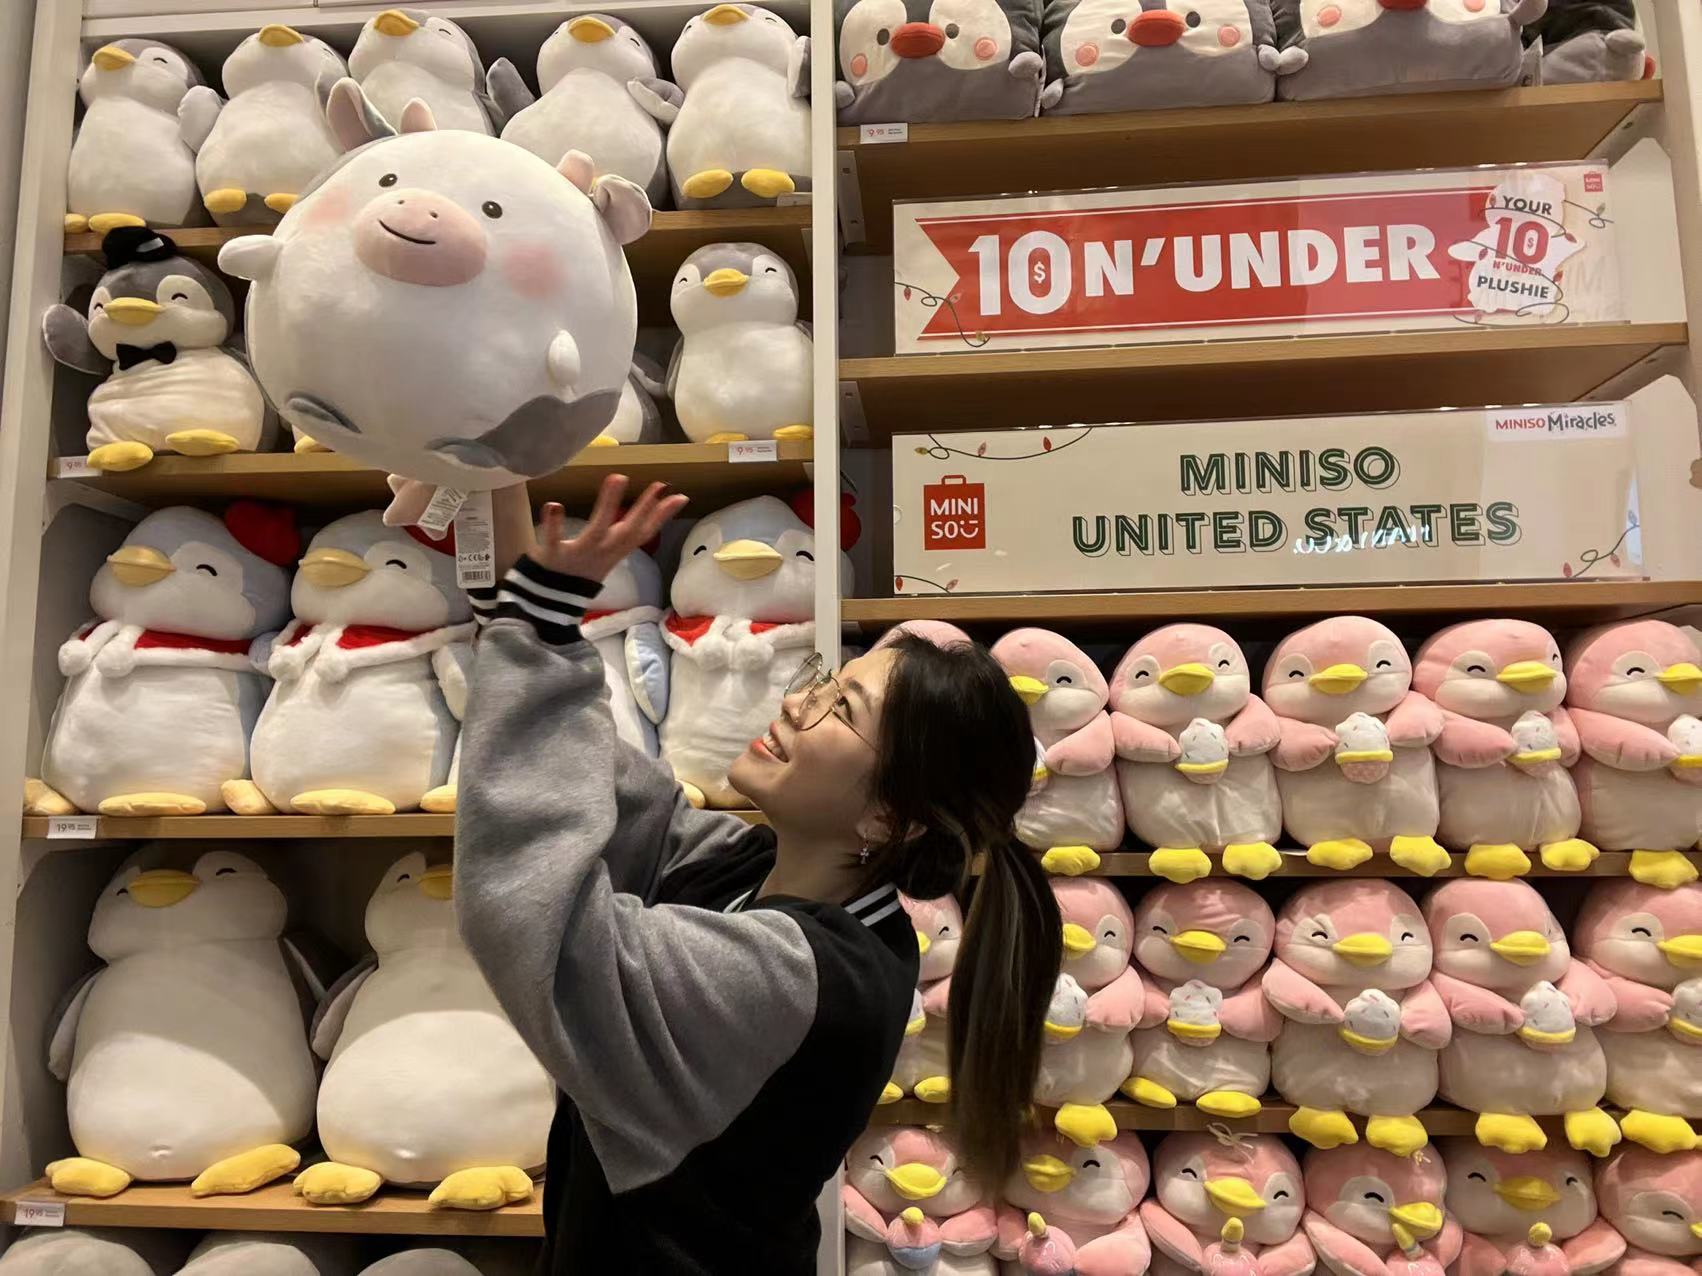 MINISO United States on Instagram: The Miniso x Care Bears